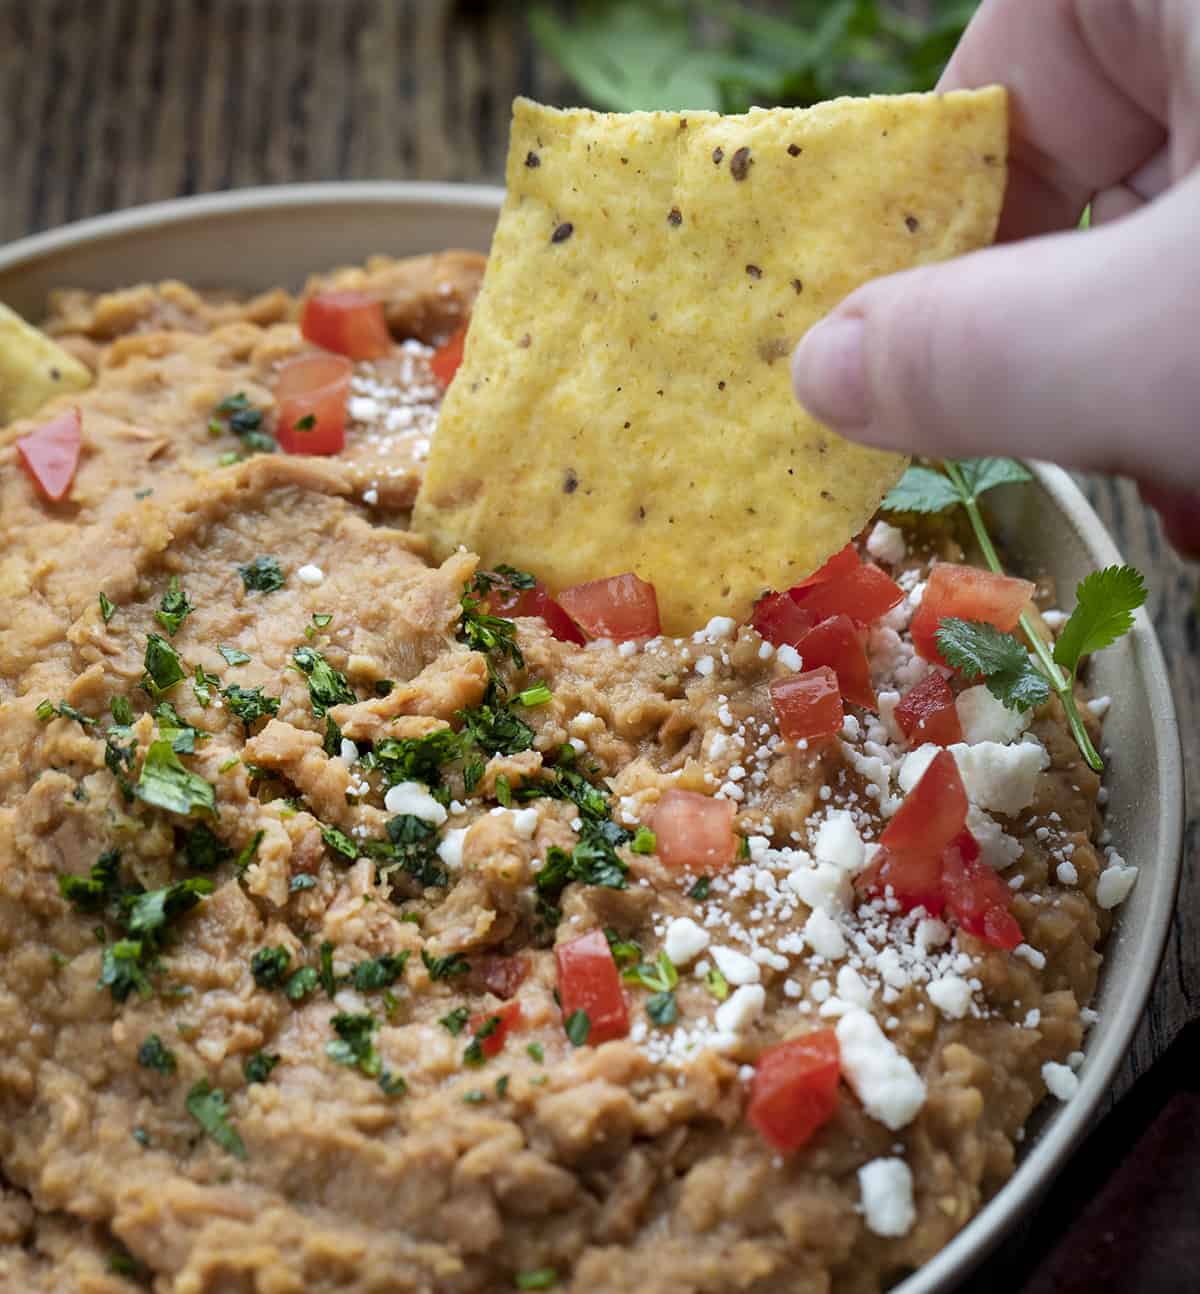 Dipping Tortilla Chip into Refried Beans 